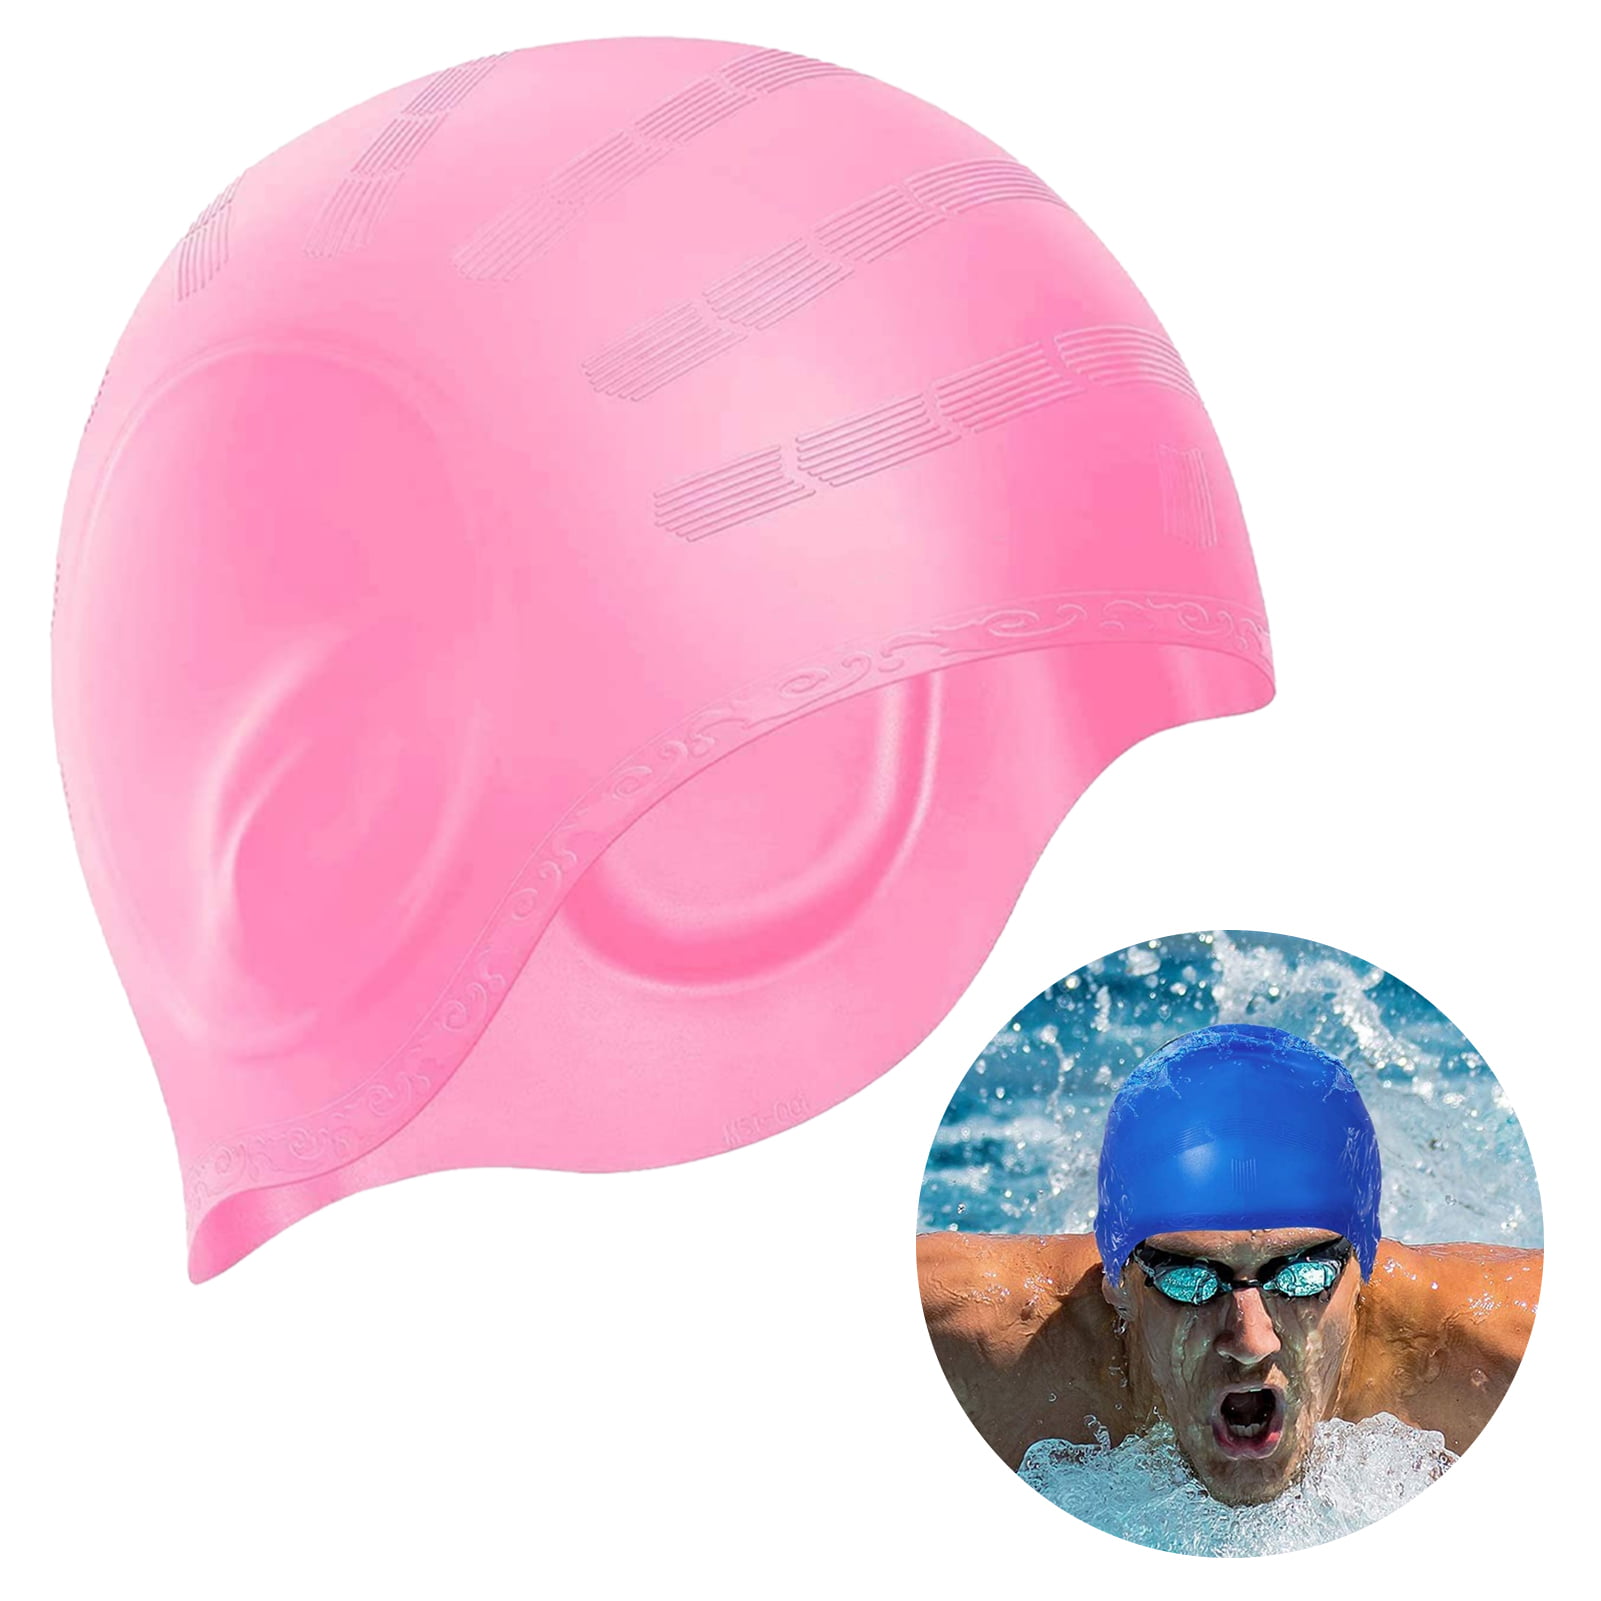 Silicone Swimming XL or L Cap Men Waterproof Black & Blue Swim Cap with Extra Pouch Youth and Children Pool Caps Ideal for Women Interlaken Long Hair Dreadlock Swim Cap